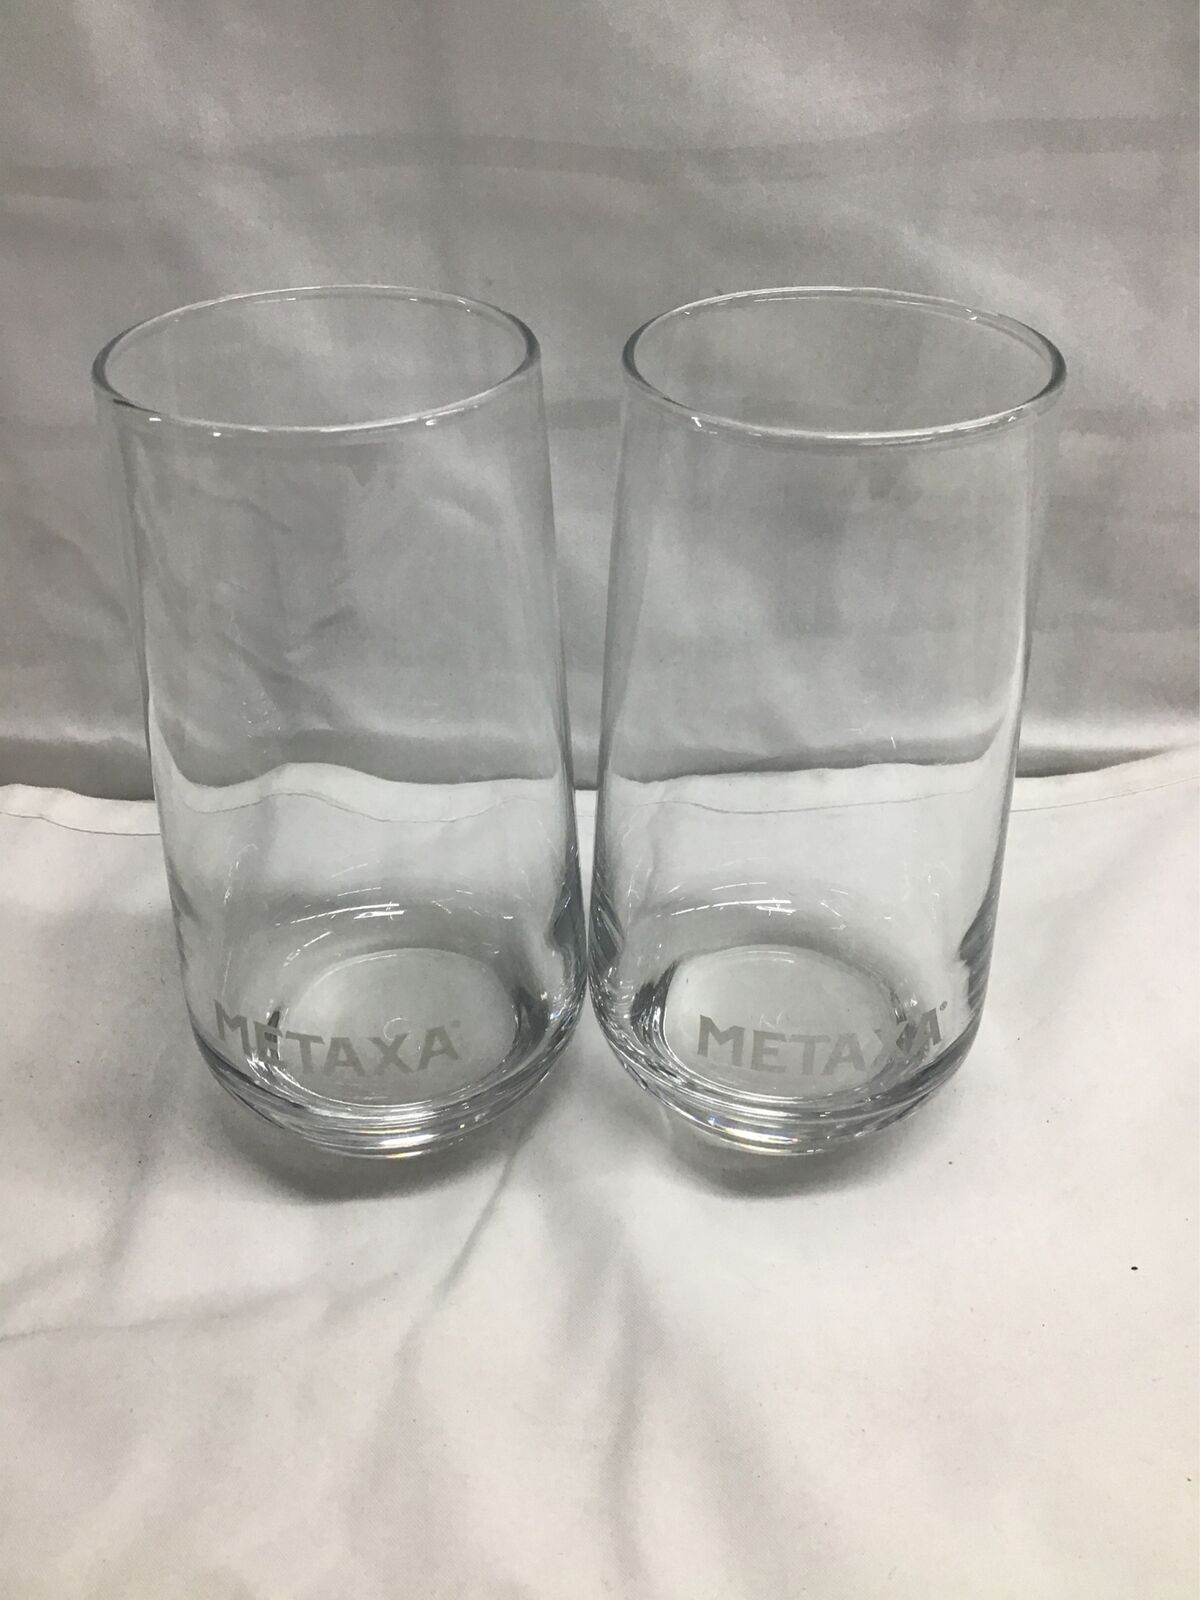 Metaxa 5 Star Greek Spirit Liqueur Engraved Collectible Glasses Cup Set Of 2